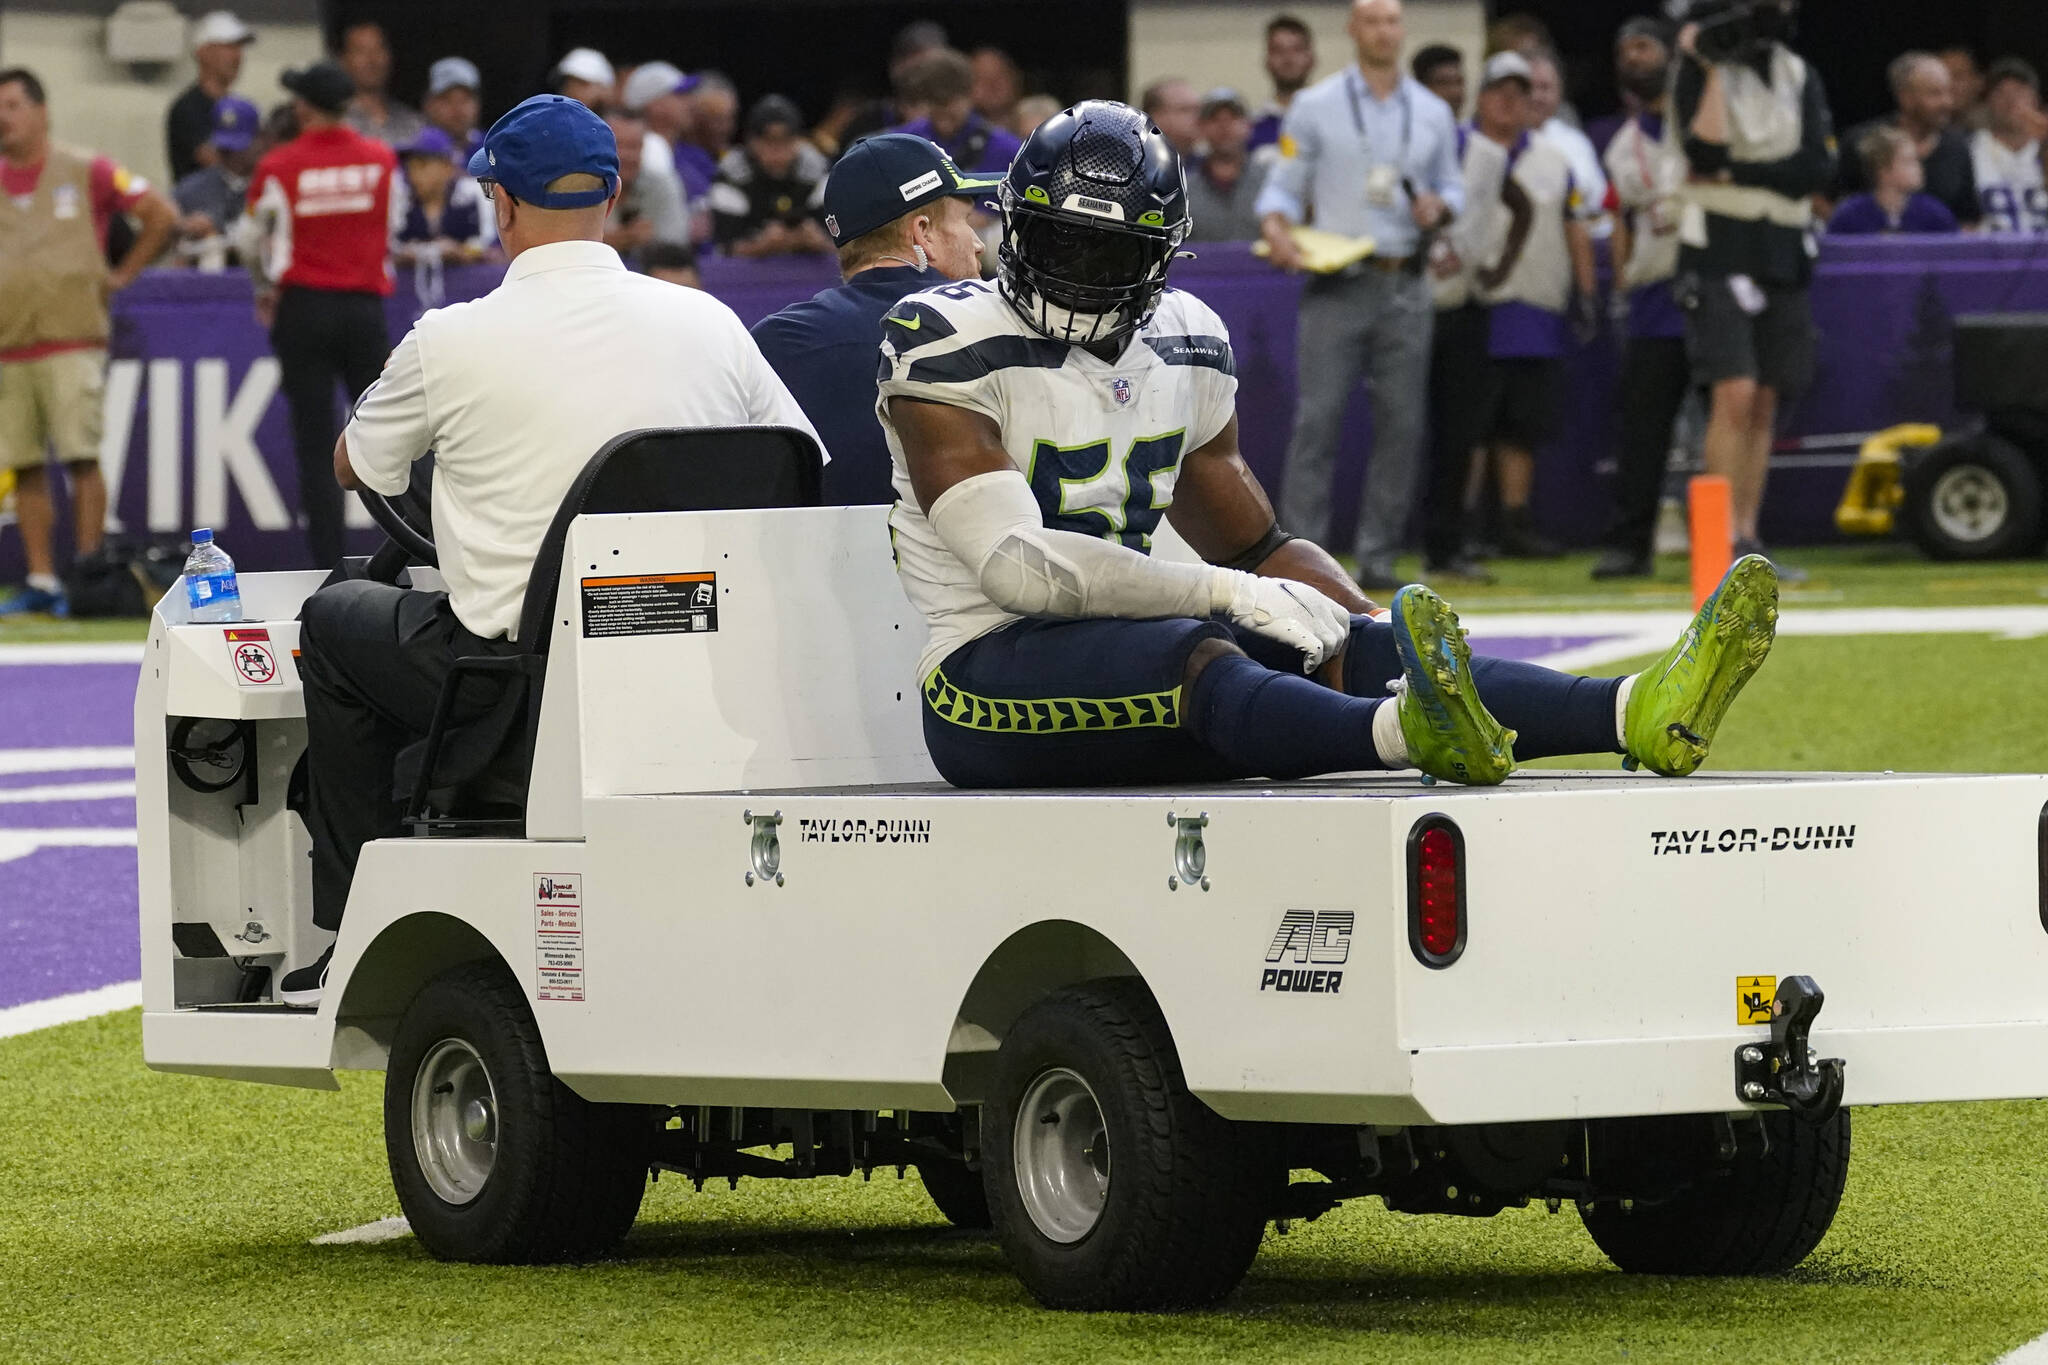 Seattle Seahawks linebacker Jordyn Brooks (56) is taken off the field after being injured in the second half of an NFL football game against the Minnesota Vikings in Minneapolis, Sunday, Sept. 26, 2021. The former first-round pick is an example of the Seahawks failing to find difference makers in recent NFL drafts. (AP Photo/Jim Mone)